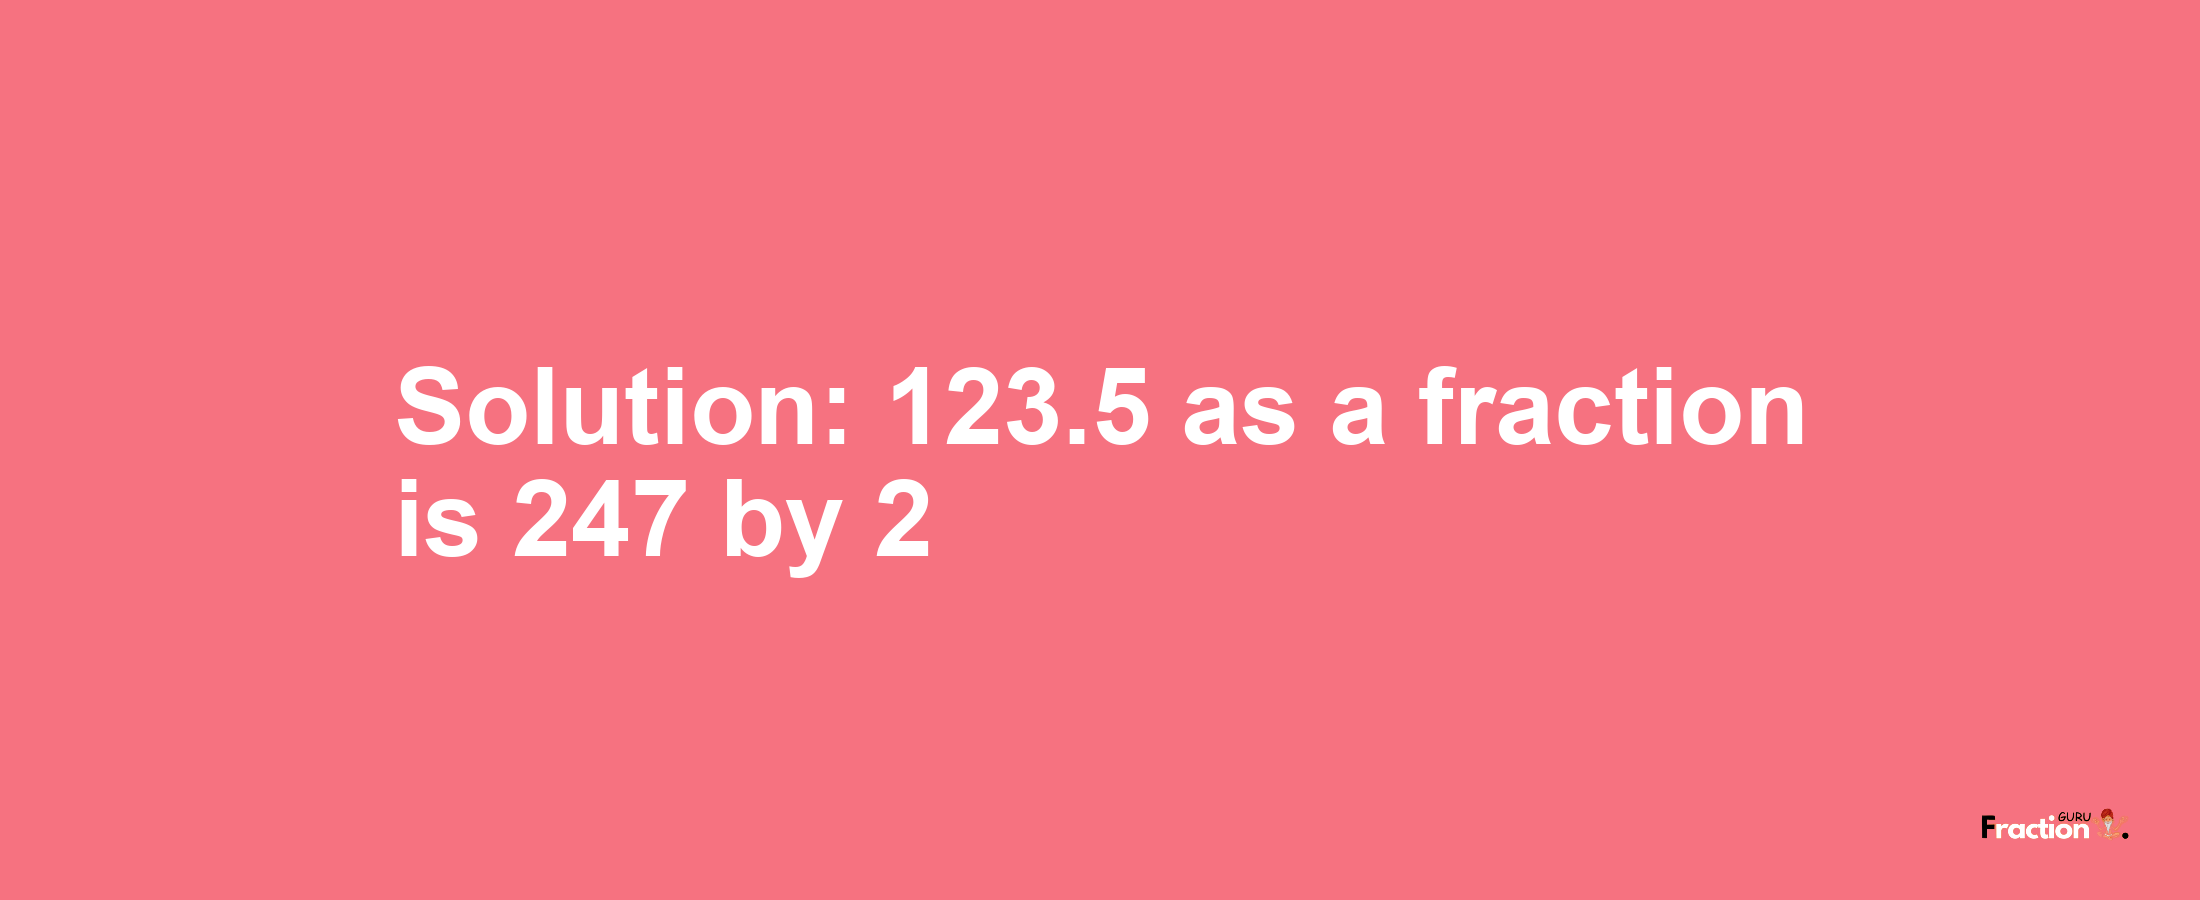 Solution:123.5 as a fraction is 247/2